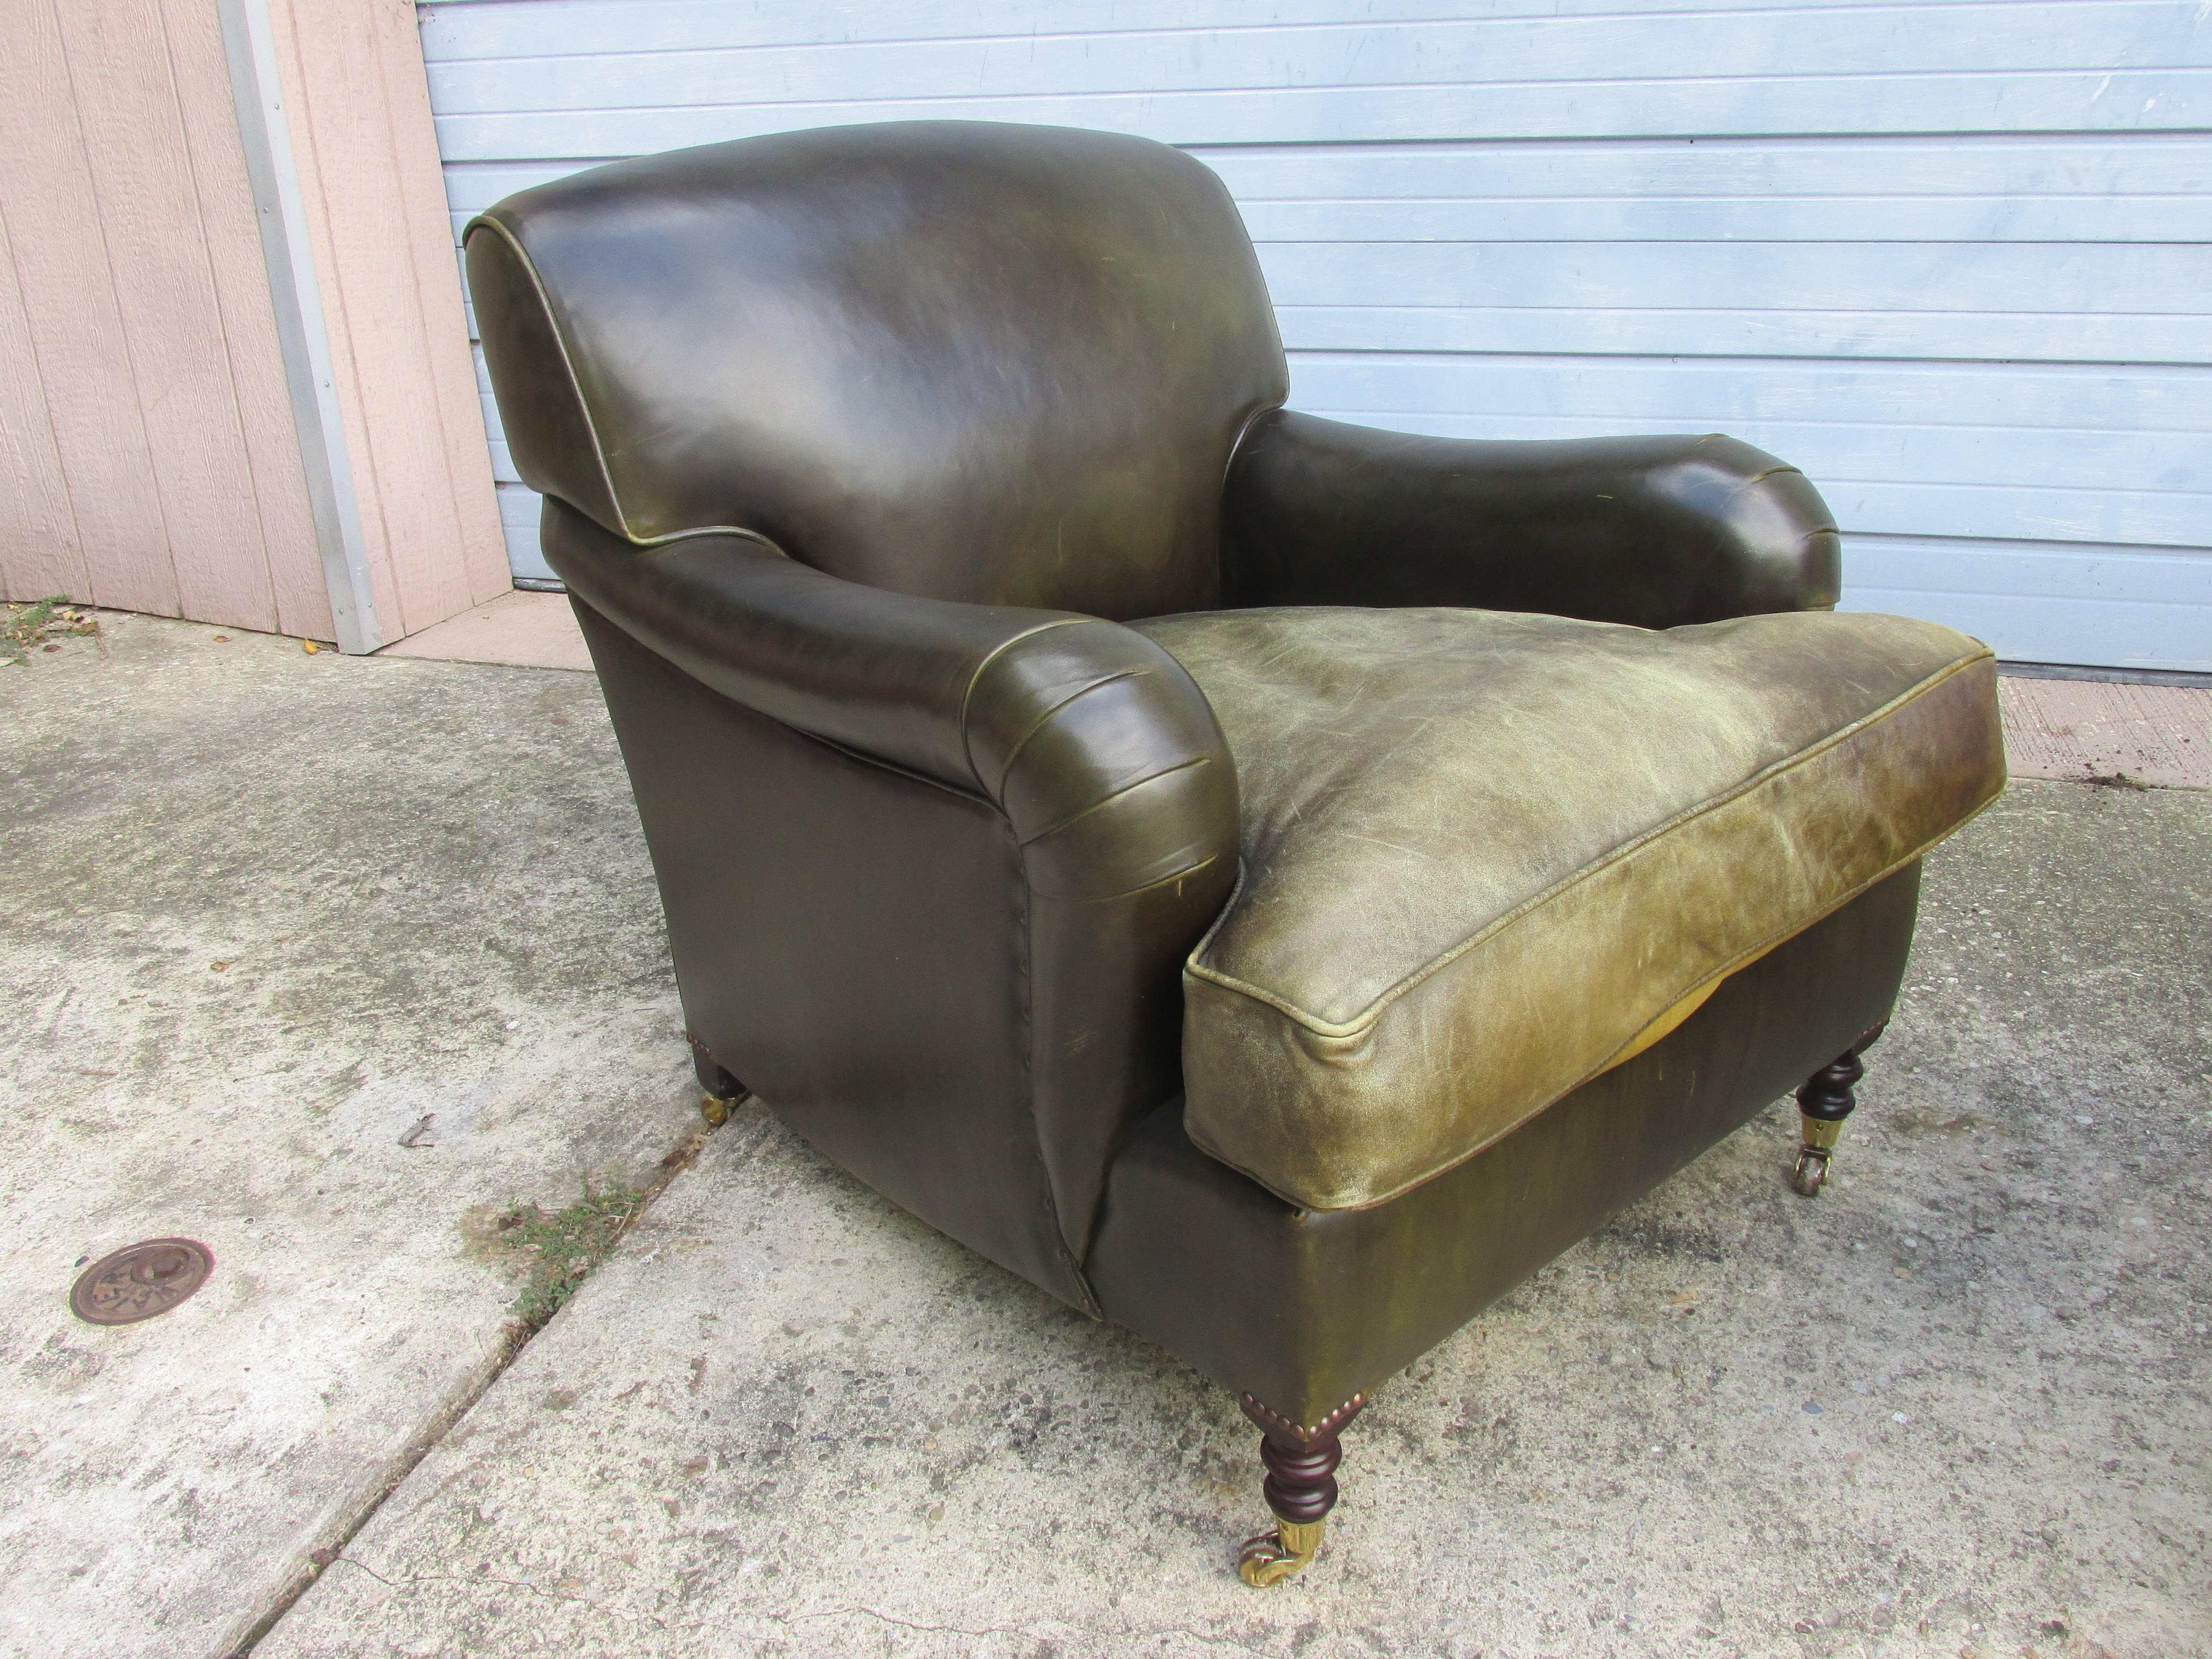 Nicely aged George Smith armchairs in a dark green leather, with perfectly worn leather down cushion seats, circa 1995. Nice turned legs with brass casters. Extra deep and very loungy! Retains original labels. Ottoman from the same house also